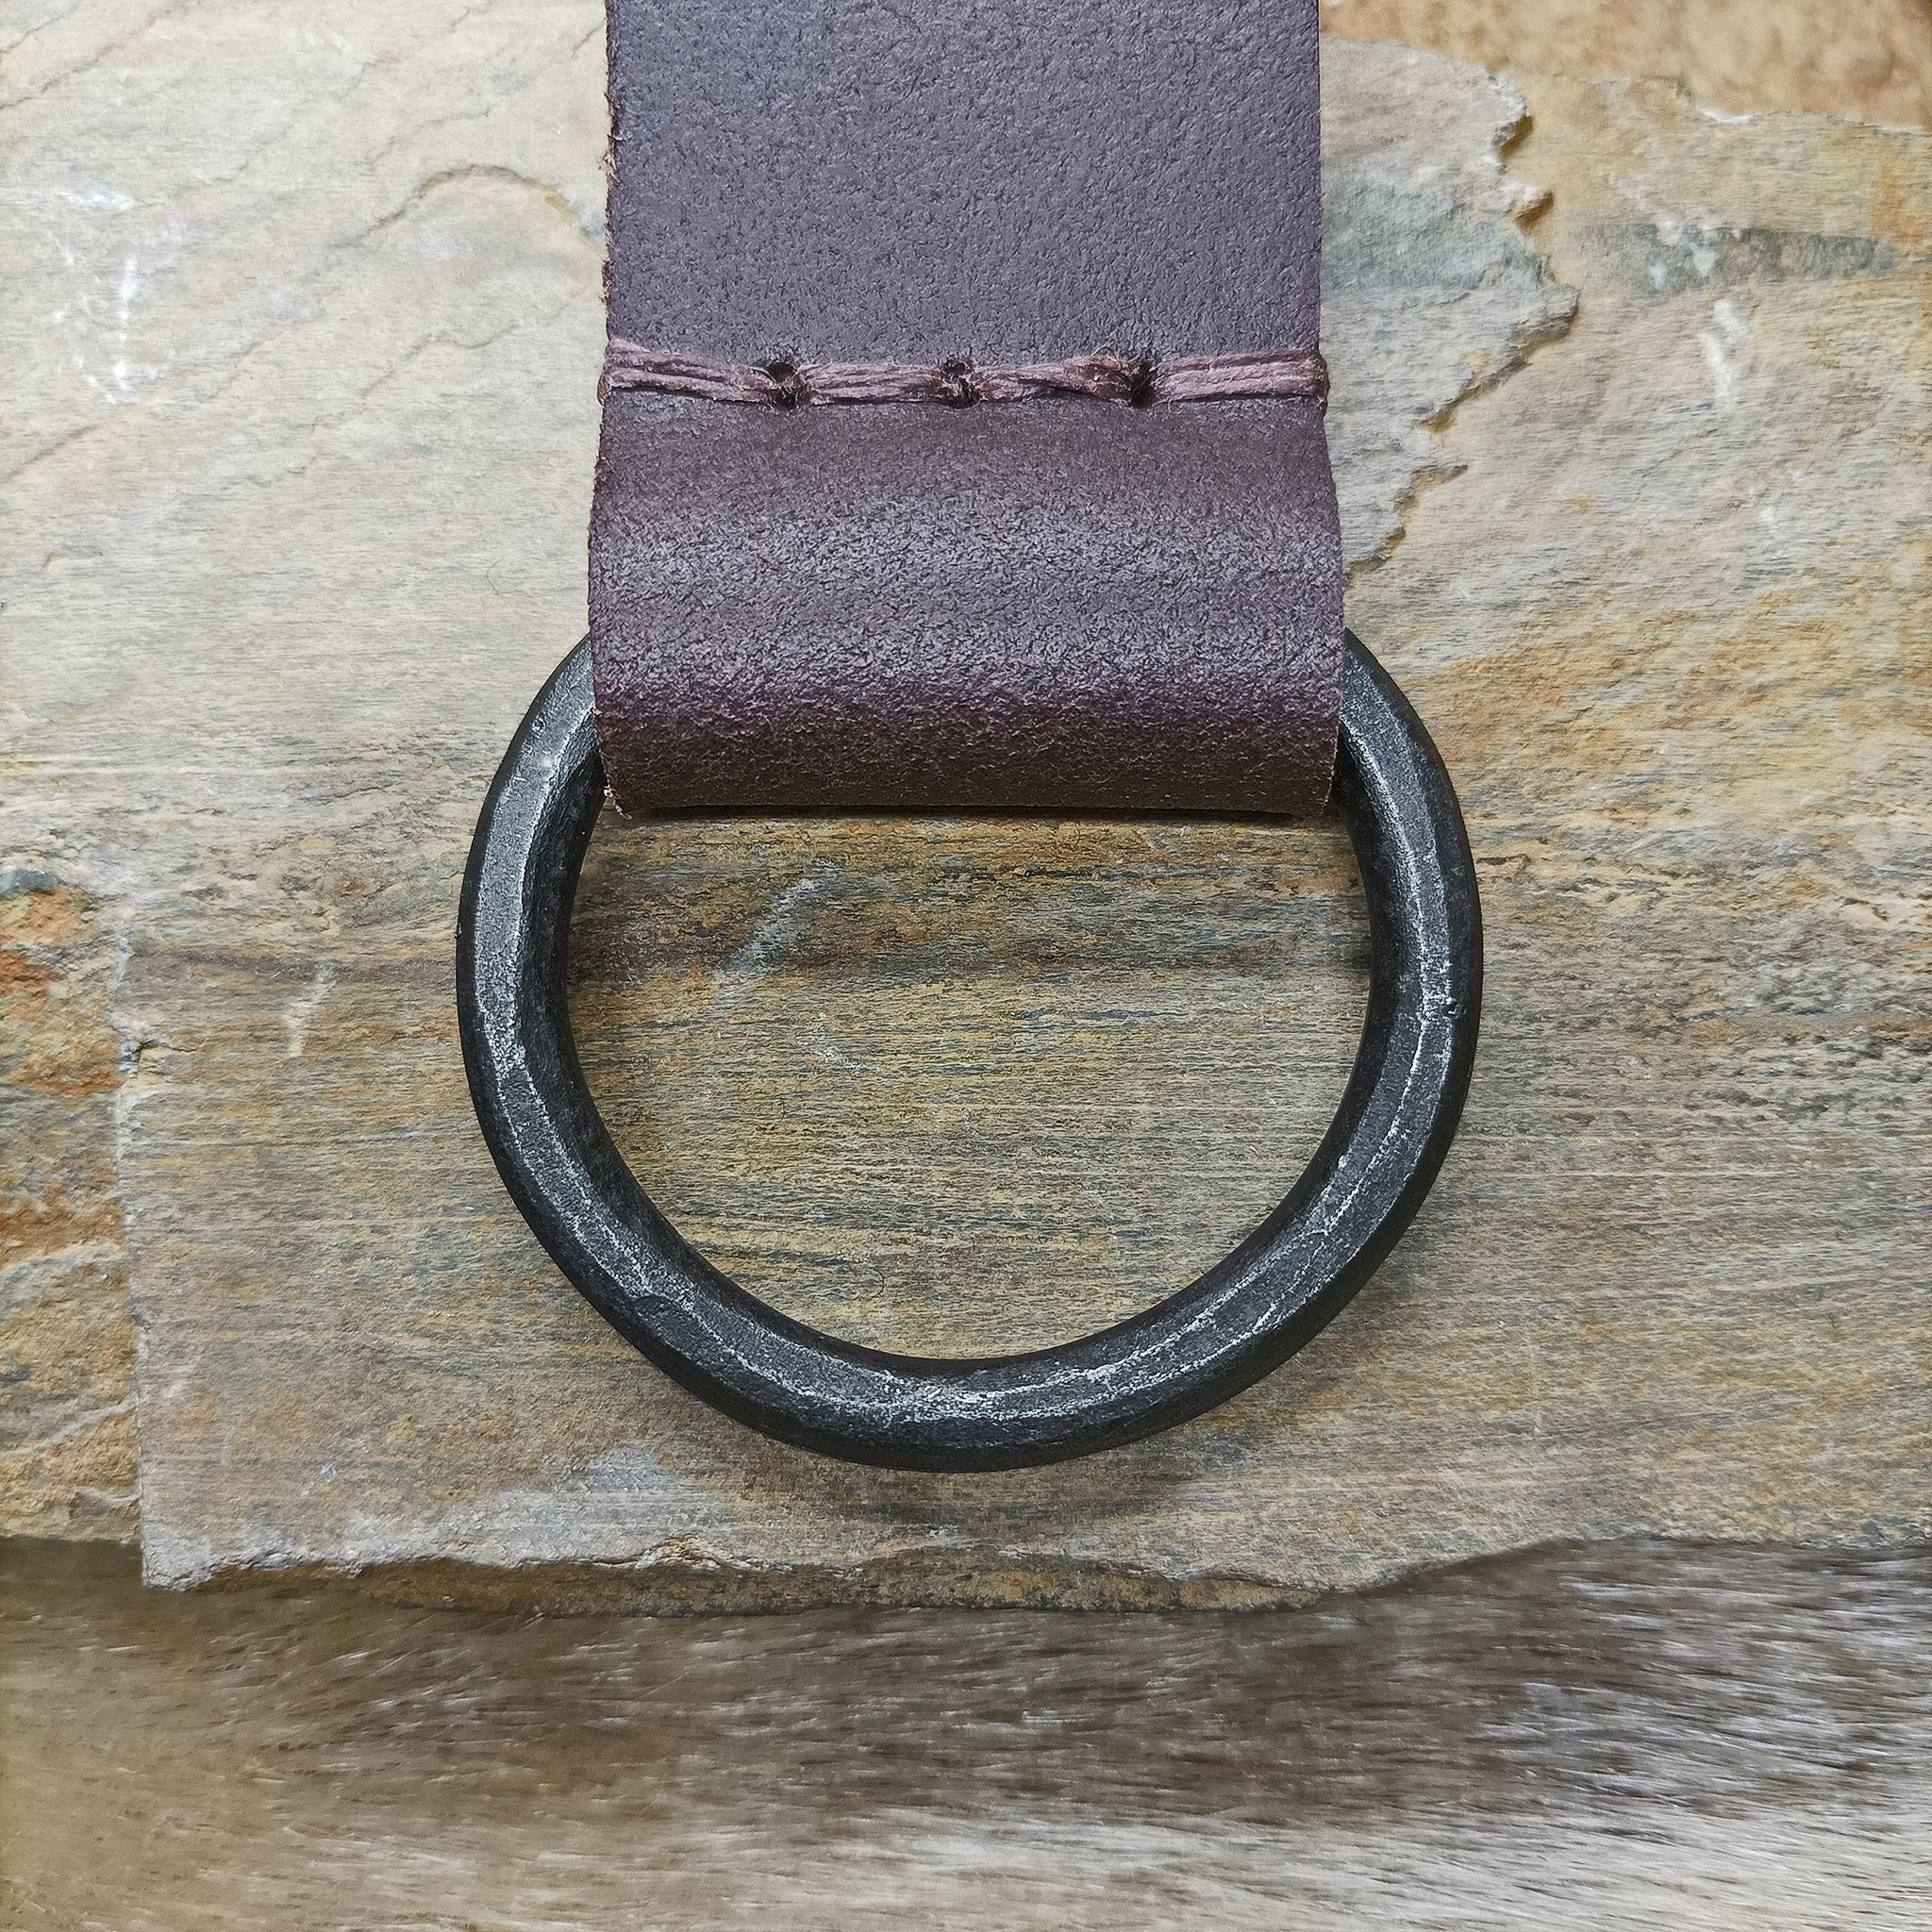 Hand-Forged Large Iron O Ring - used as Axe Hanger